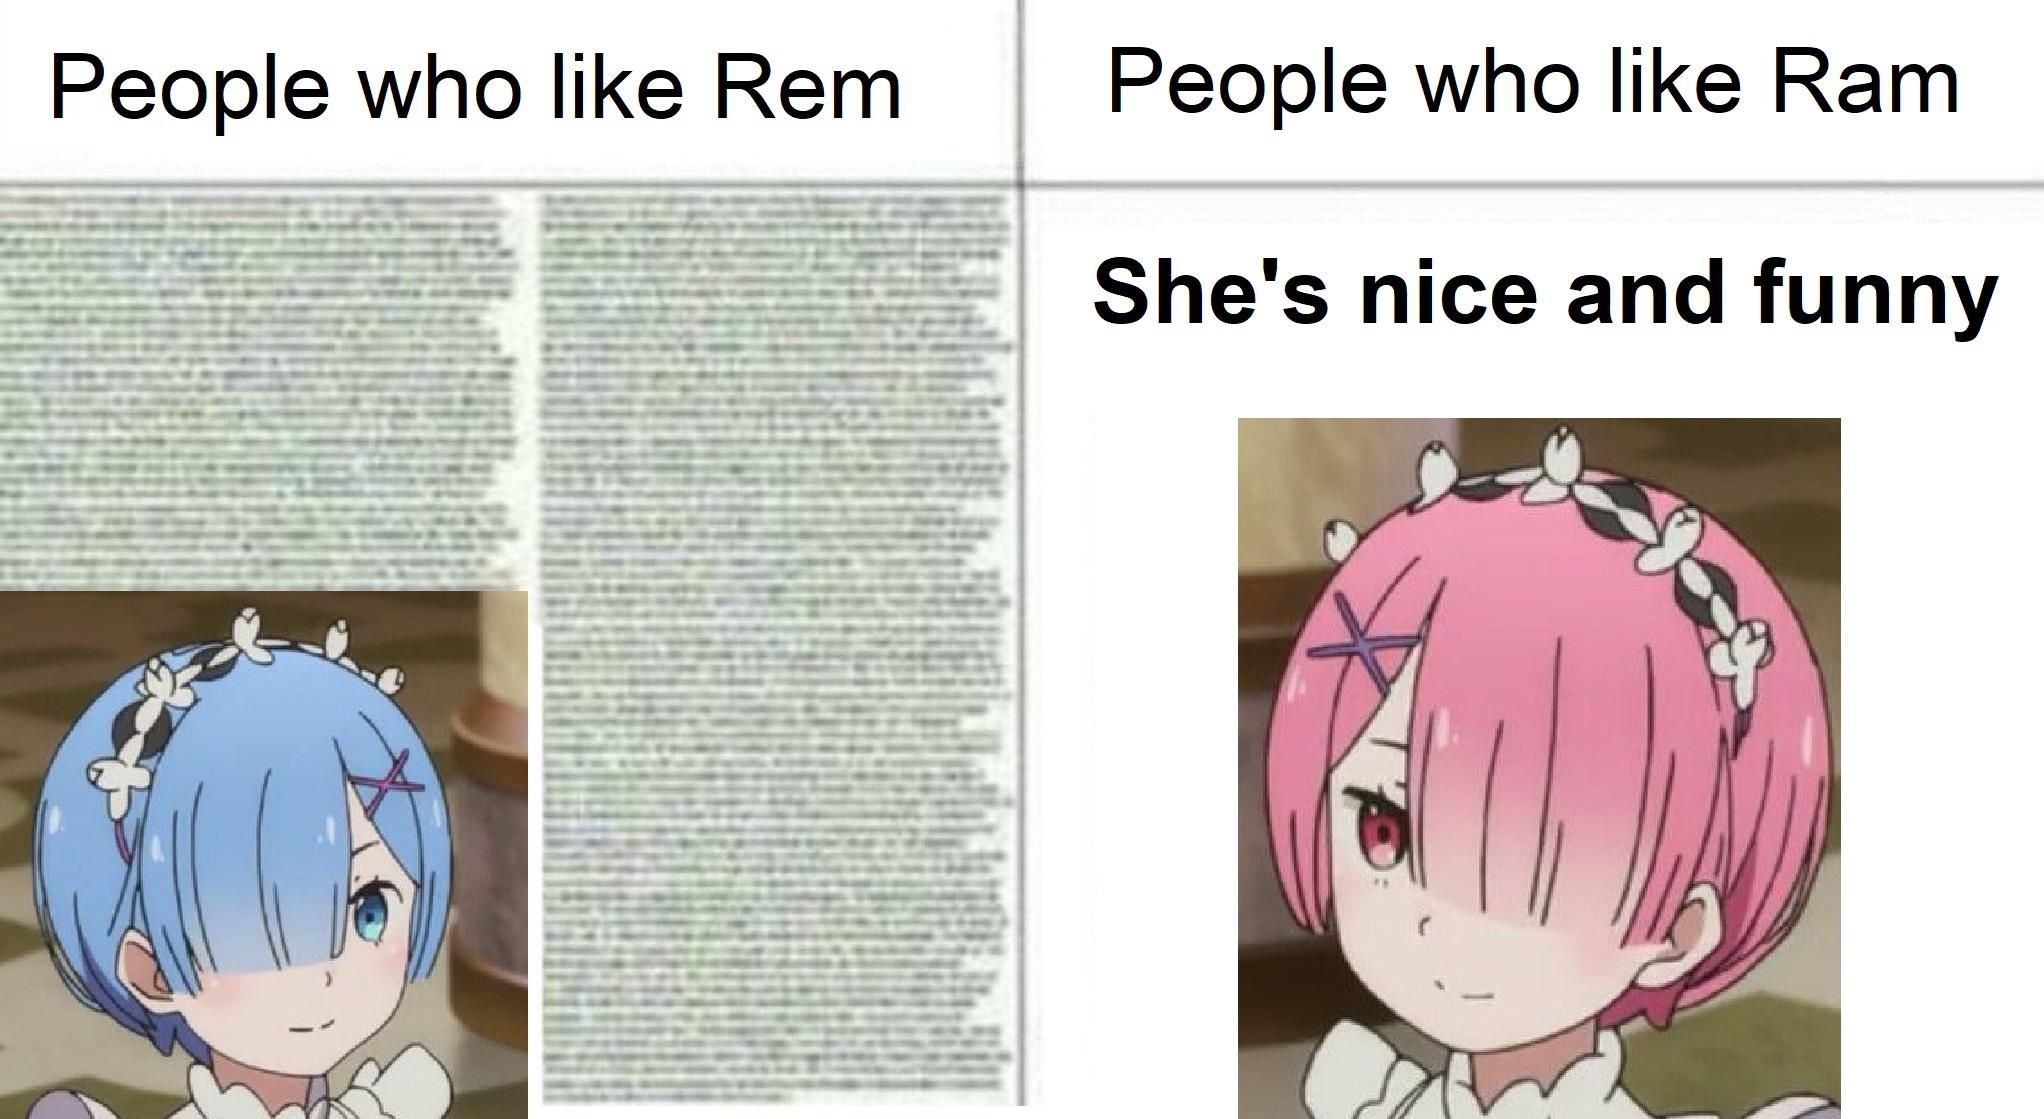 And that's why I like Ram, Your Honor